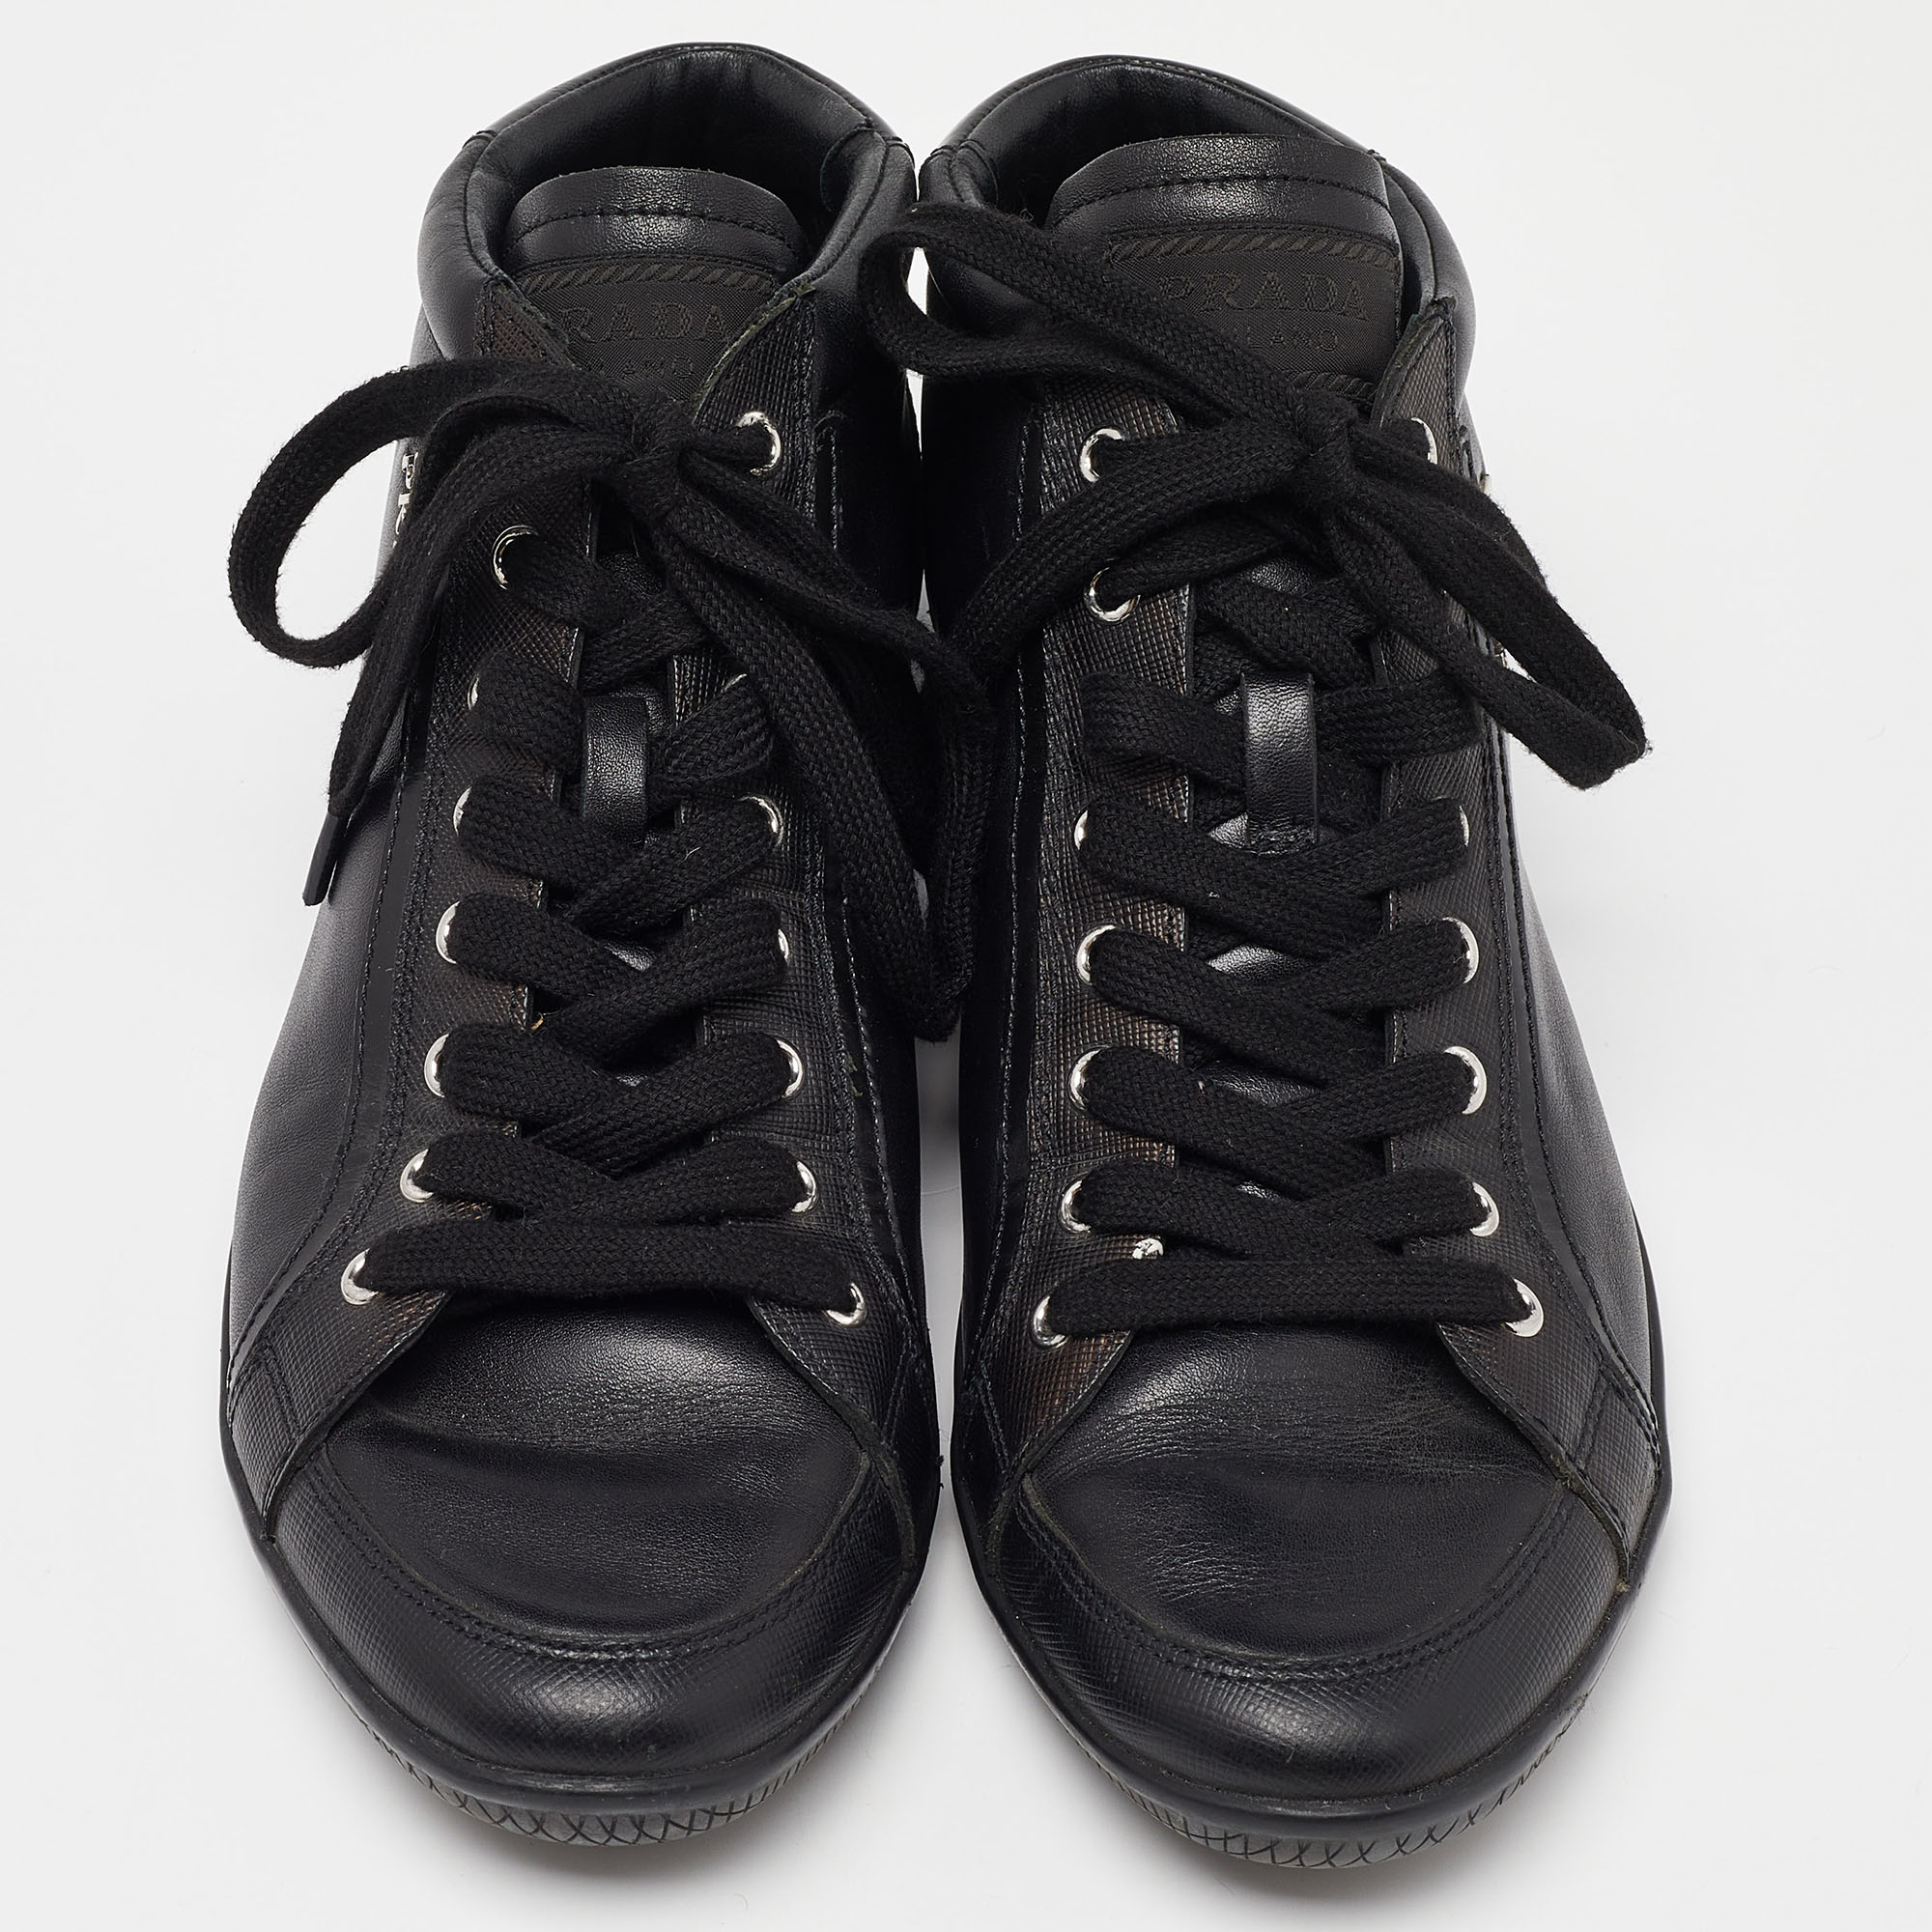 Prada Sports Black Leather High Top Sneakers Size 39